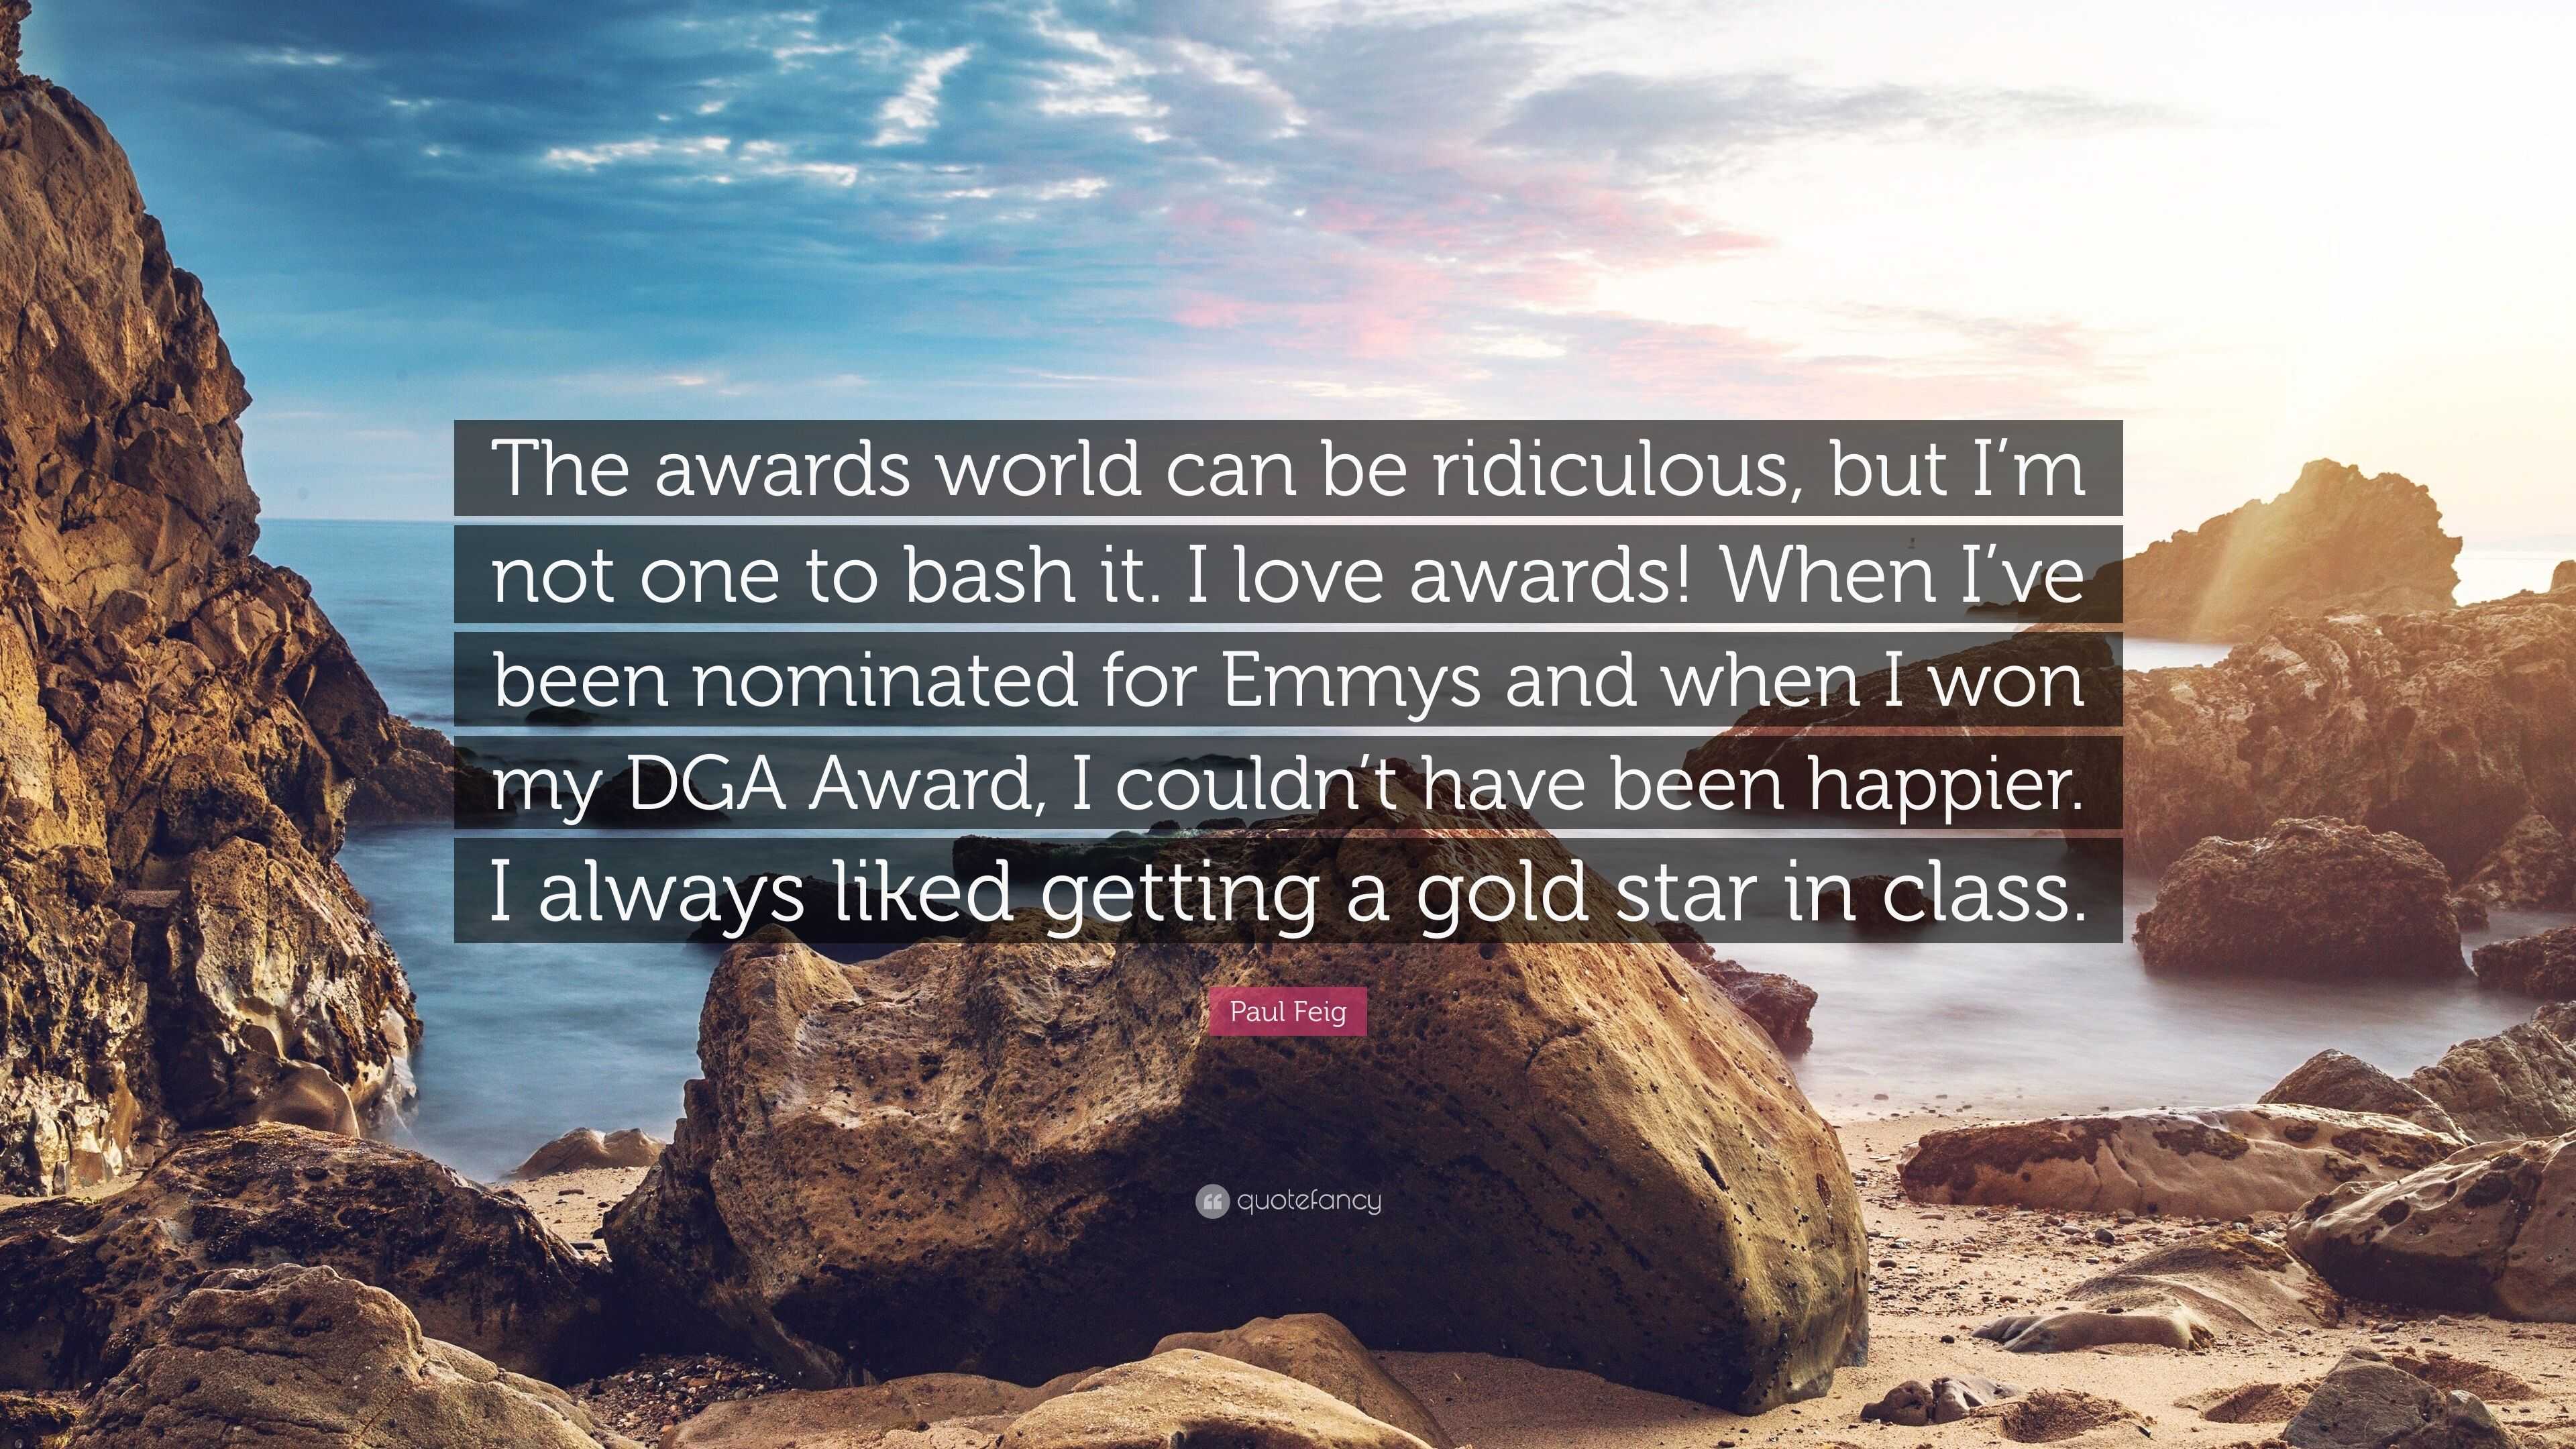 Paul Feig Quote The Awards World Can Be Ridiculous But I M Not One To Bash It I Love Awards When I Ve Been Nominated For Emmys And Wh